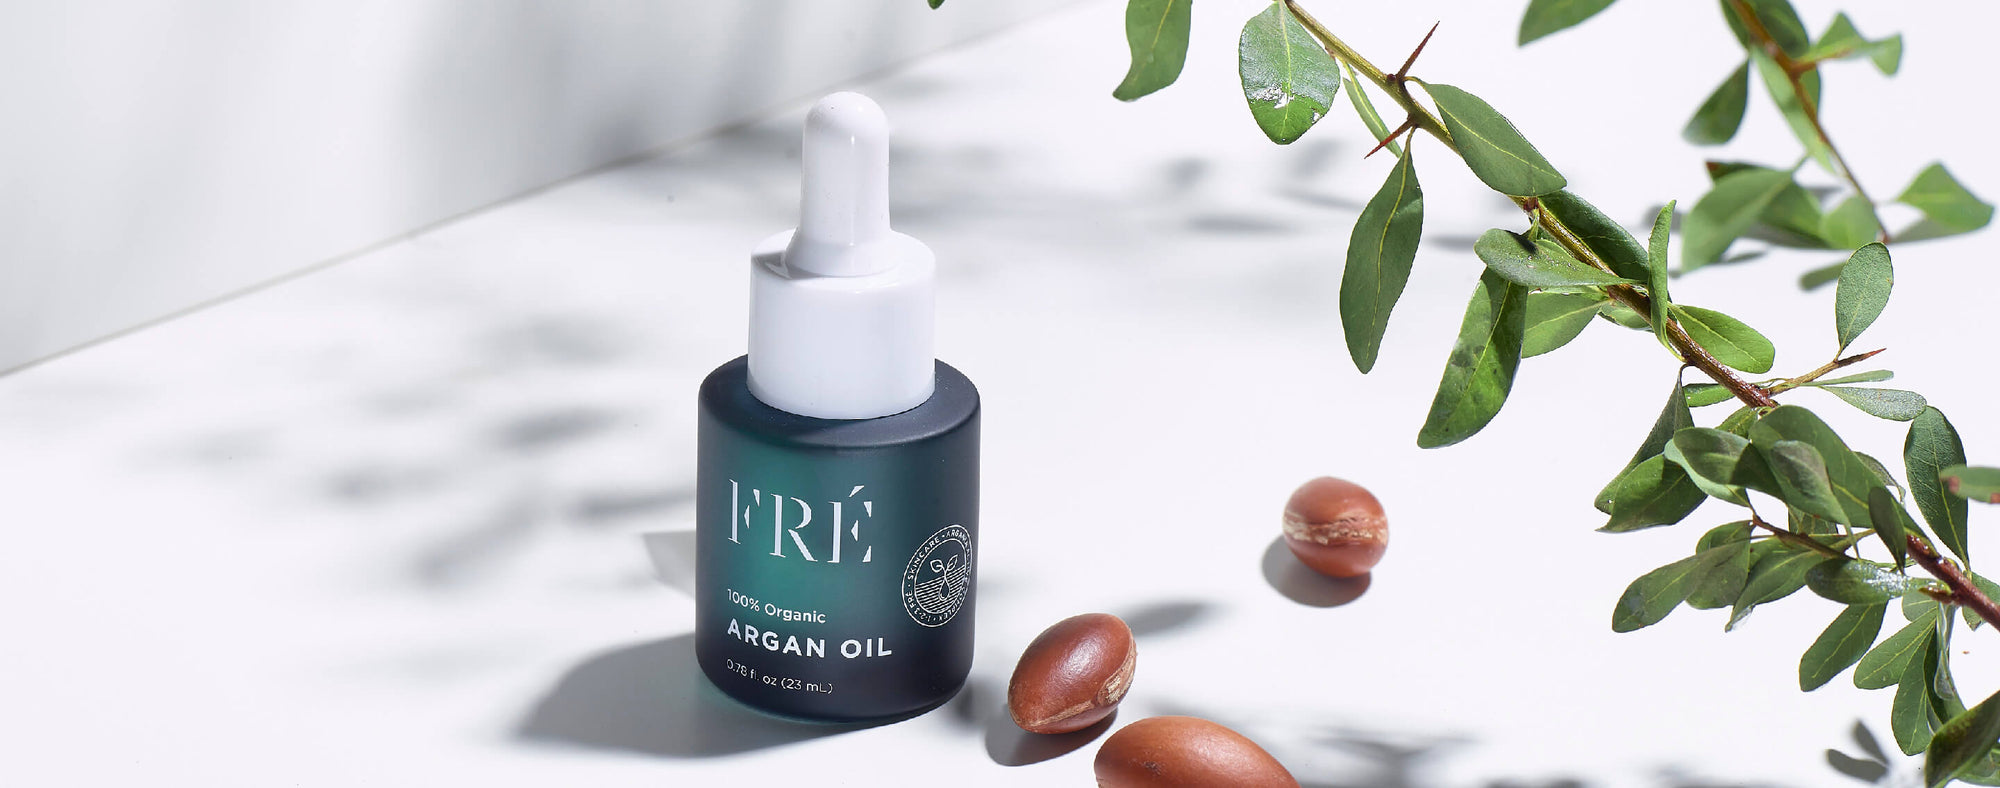 Can You Use Argan Oil for Psoriasis?